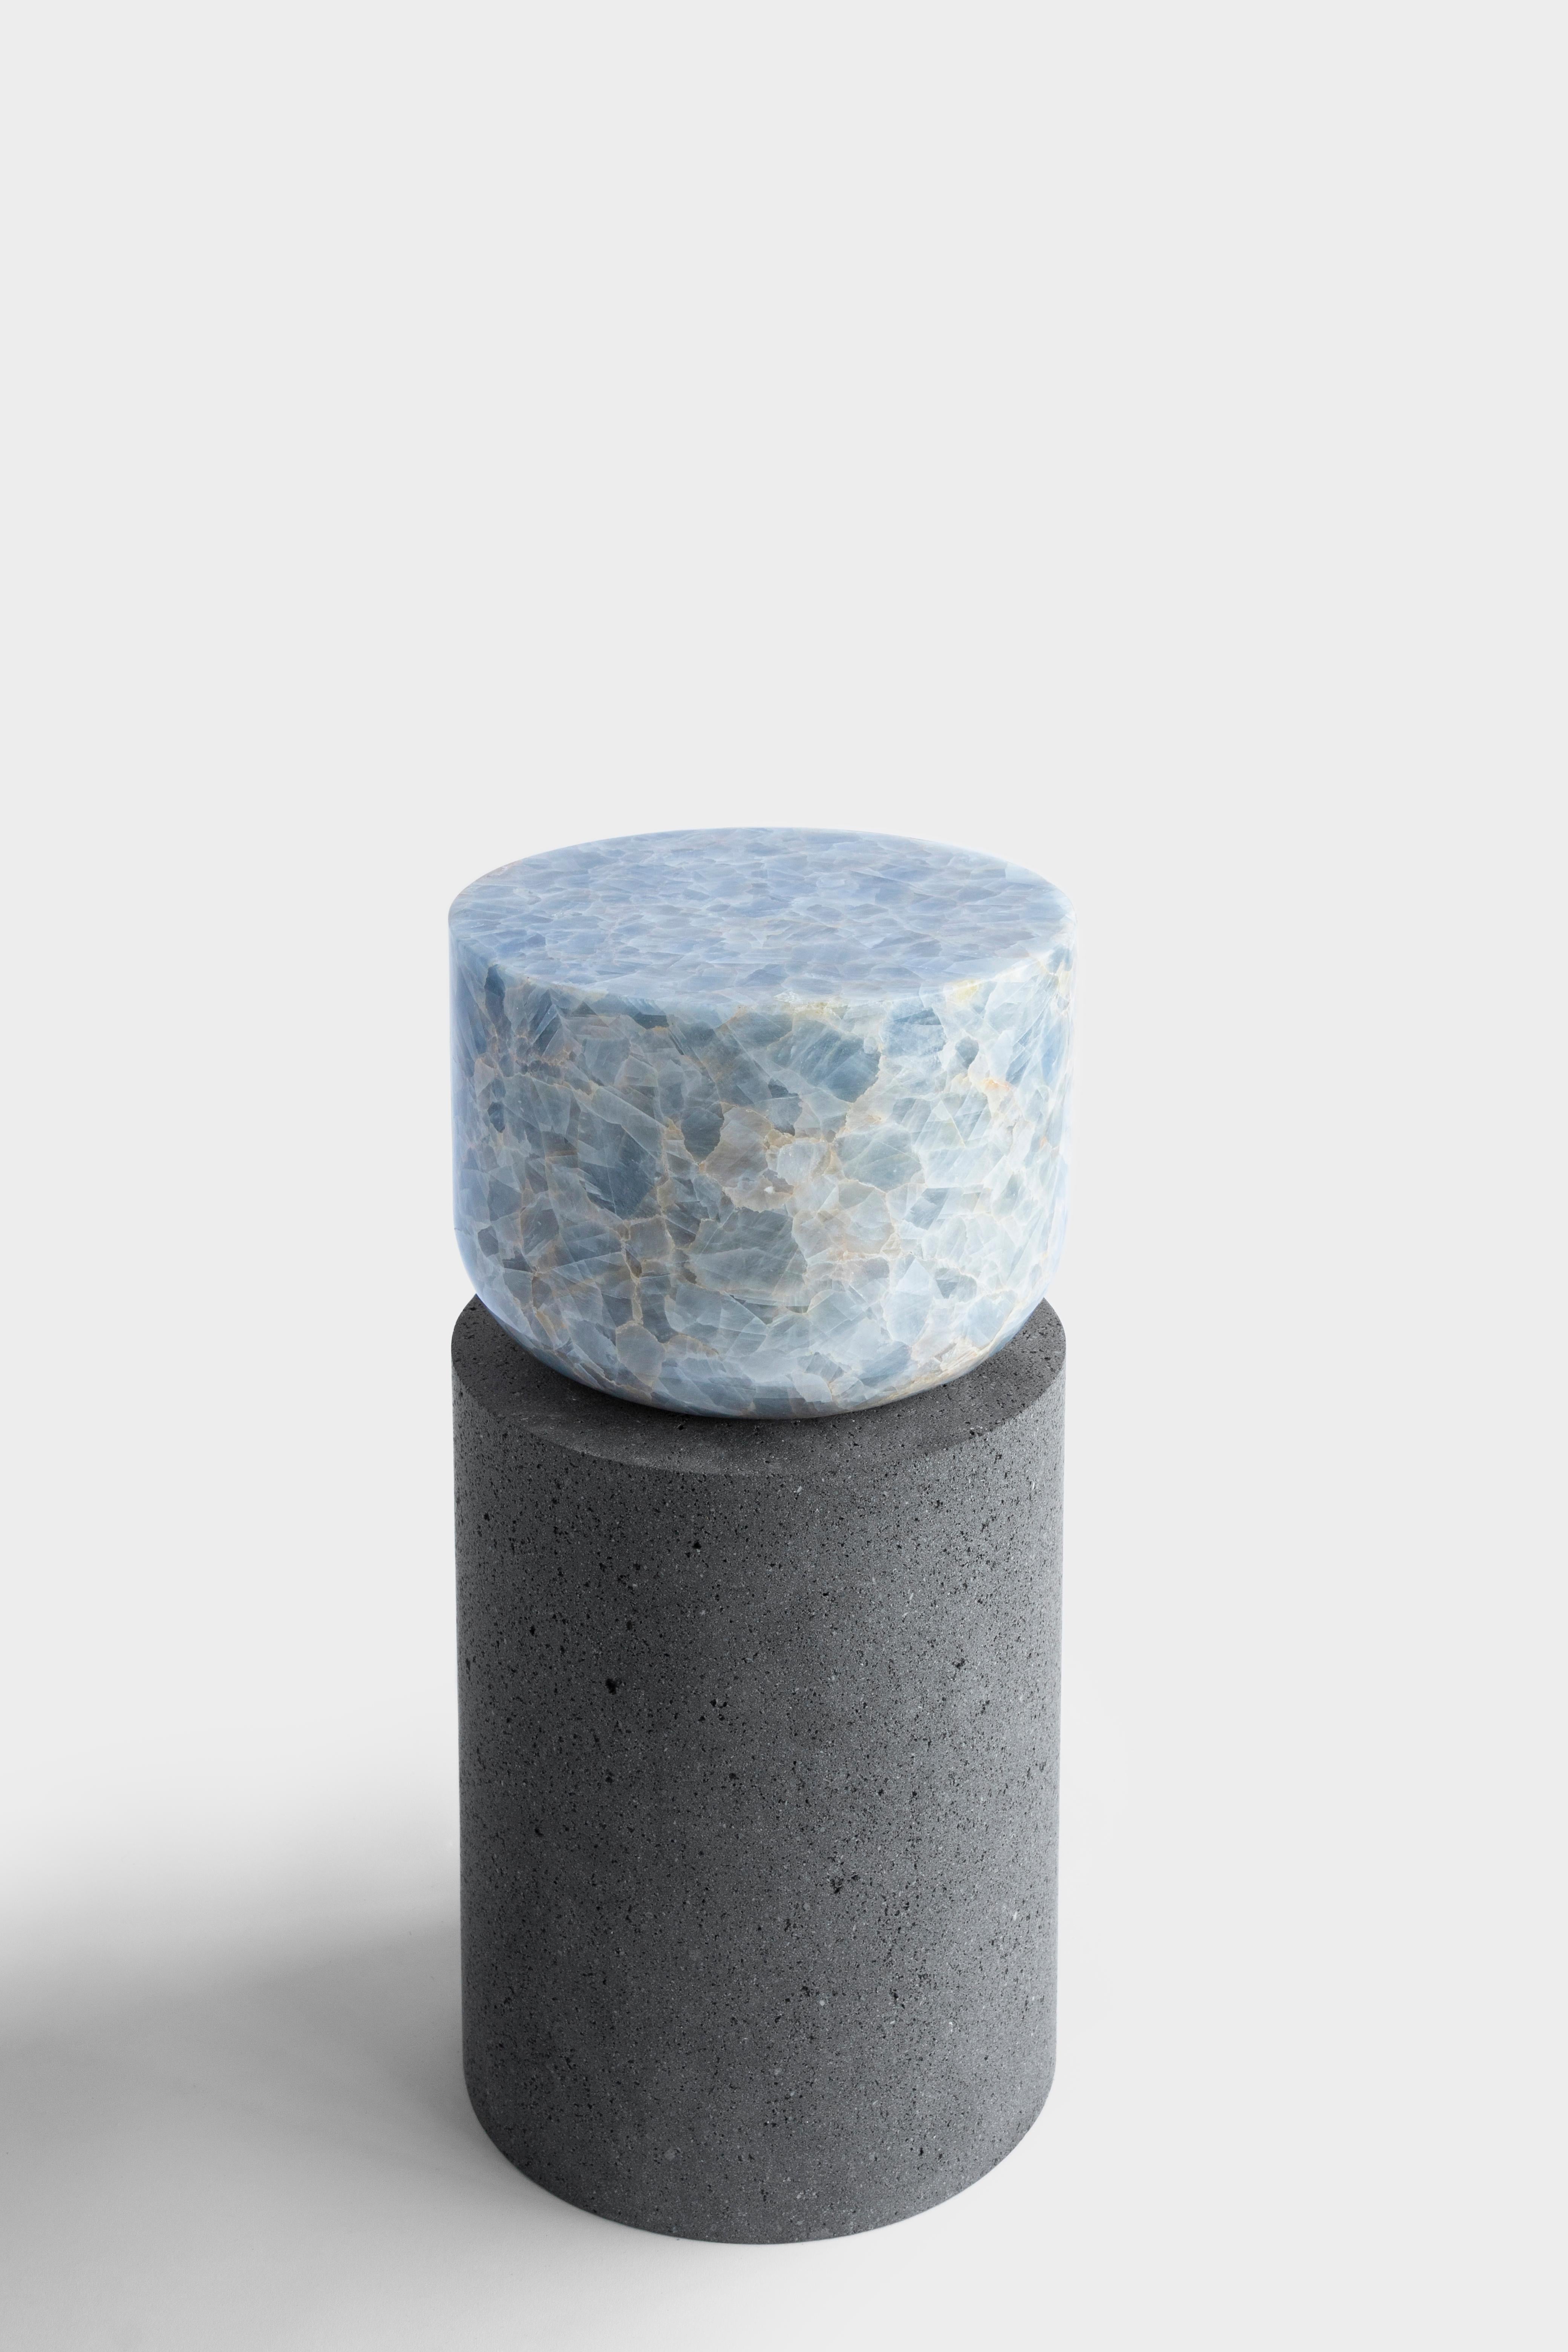 Stone Volcanic Shade V Stool/Table by Sten Studio, Represented by Tuleste Factory